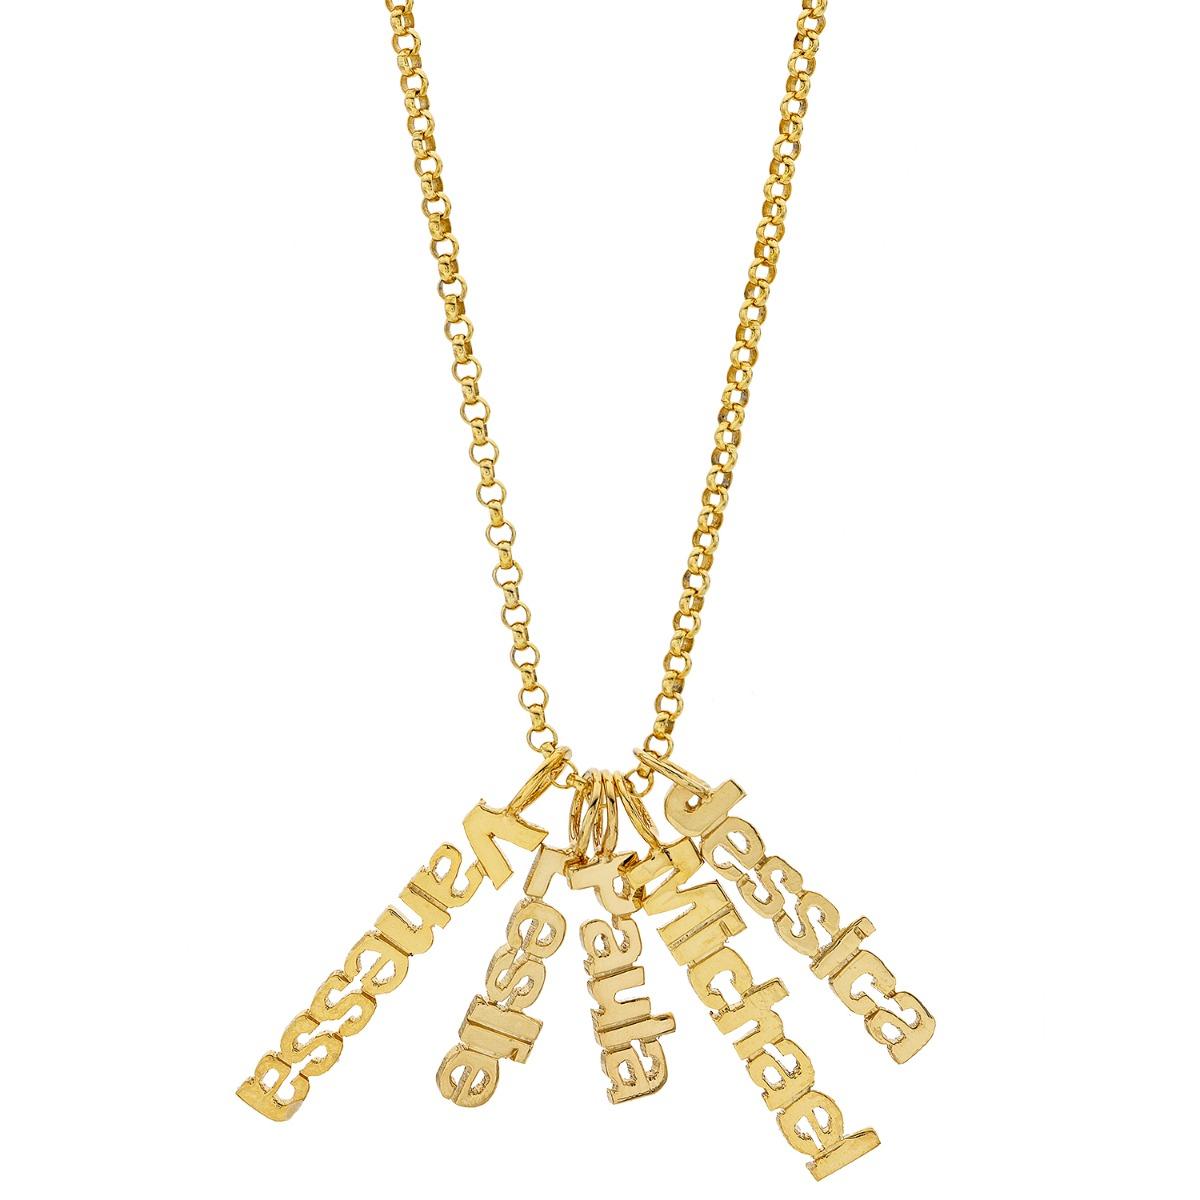 Gold Plated Five Name Charm Necklace